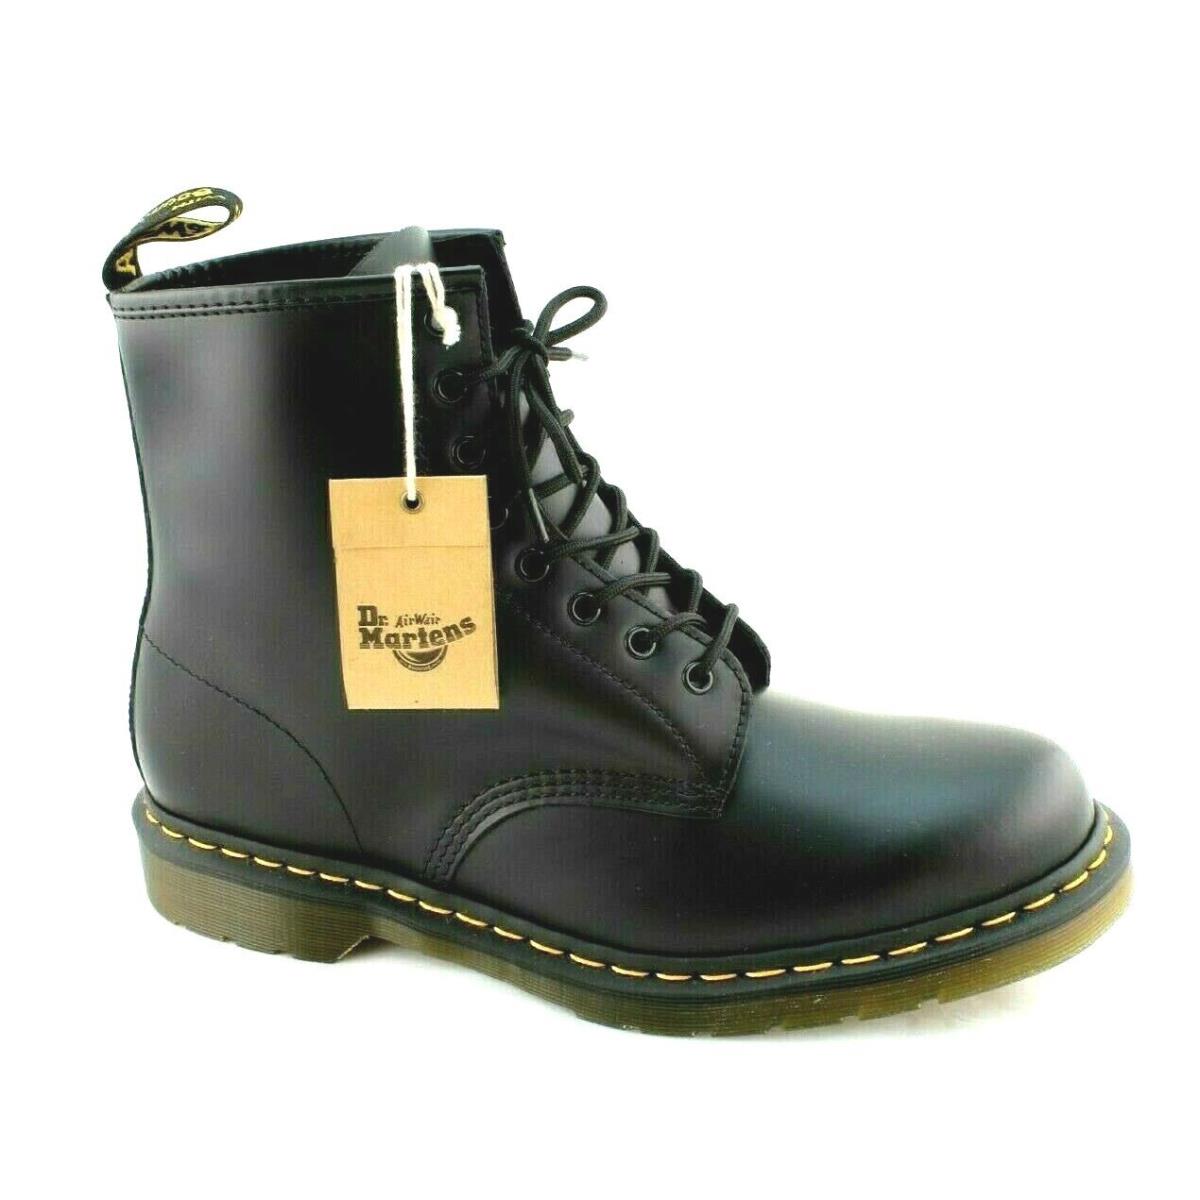 DR Martens 1460 Size 14 Black Smooth Leather 8 Eye Men`s Boots Retail